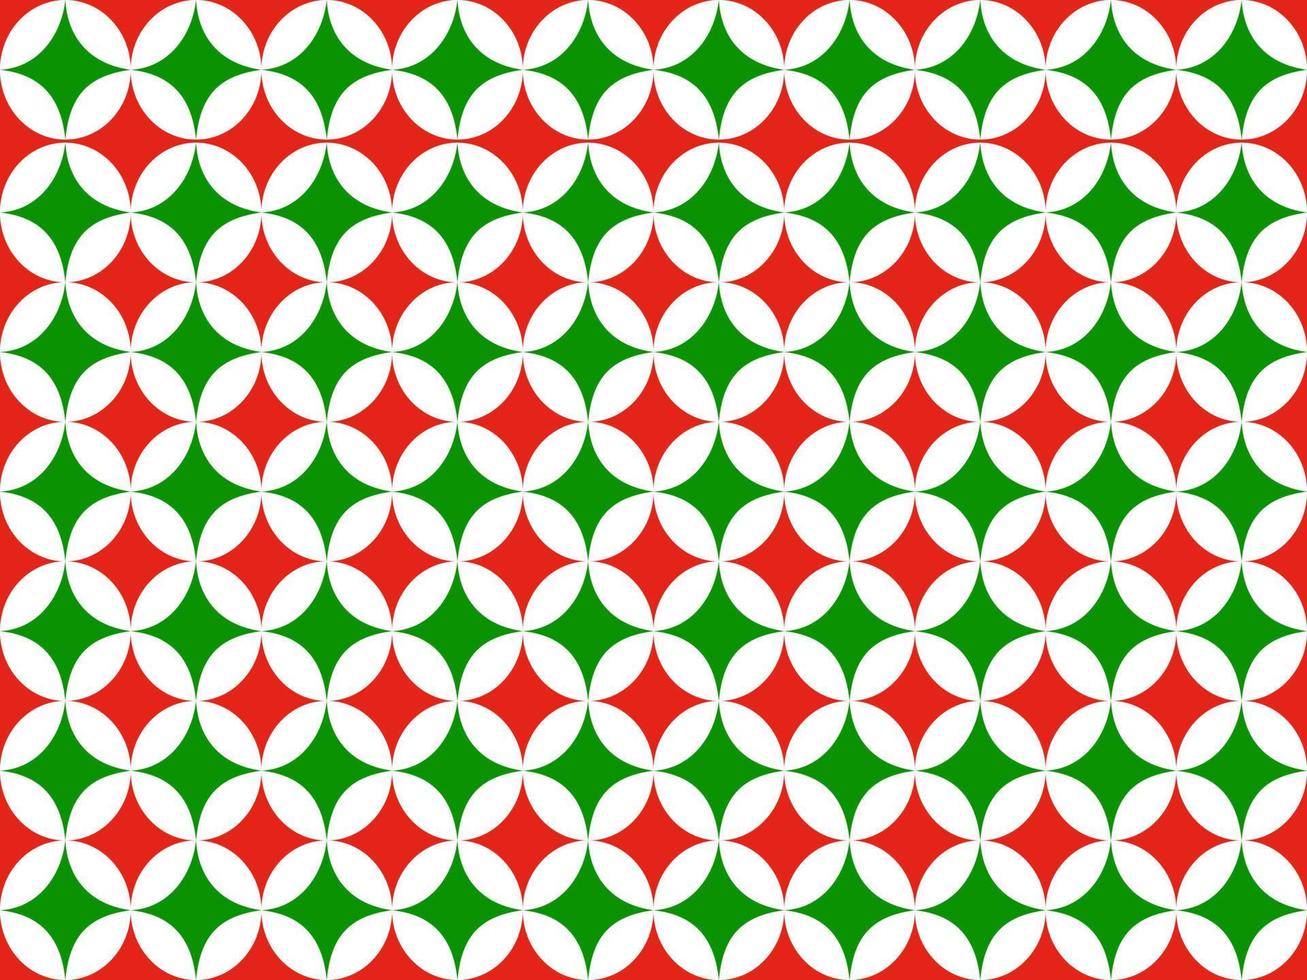 Geometric pattern with red, green and white background vector